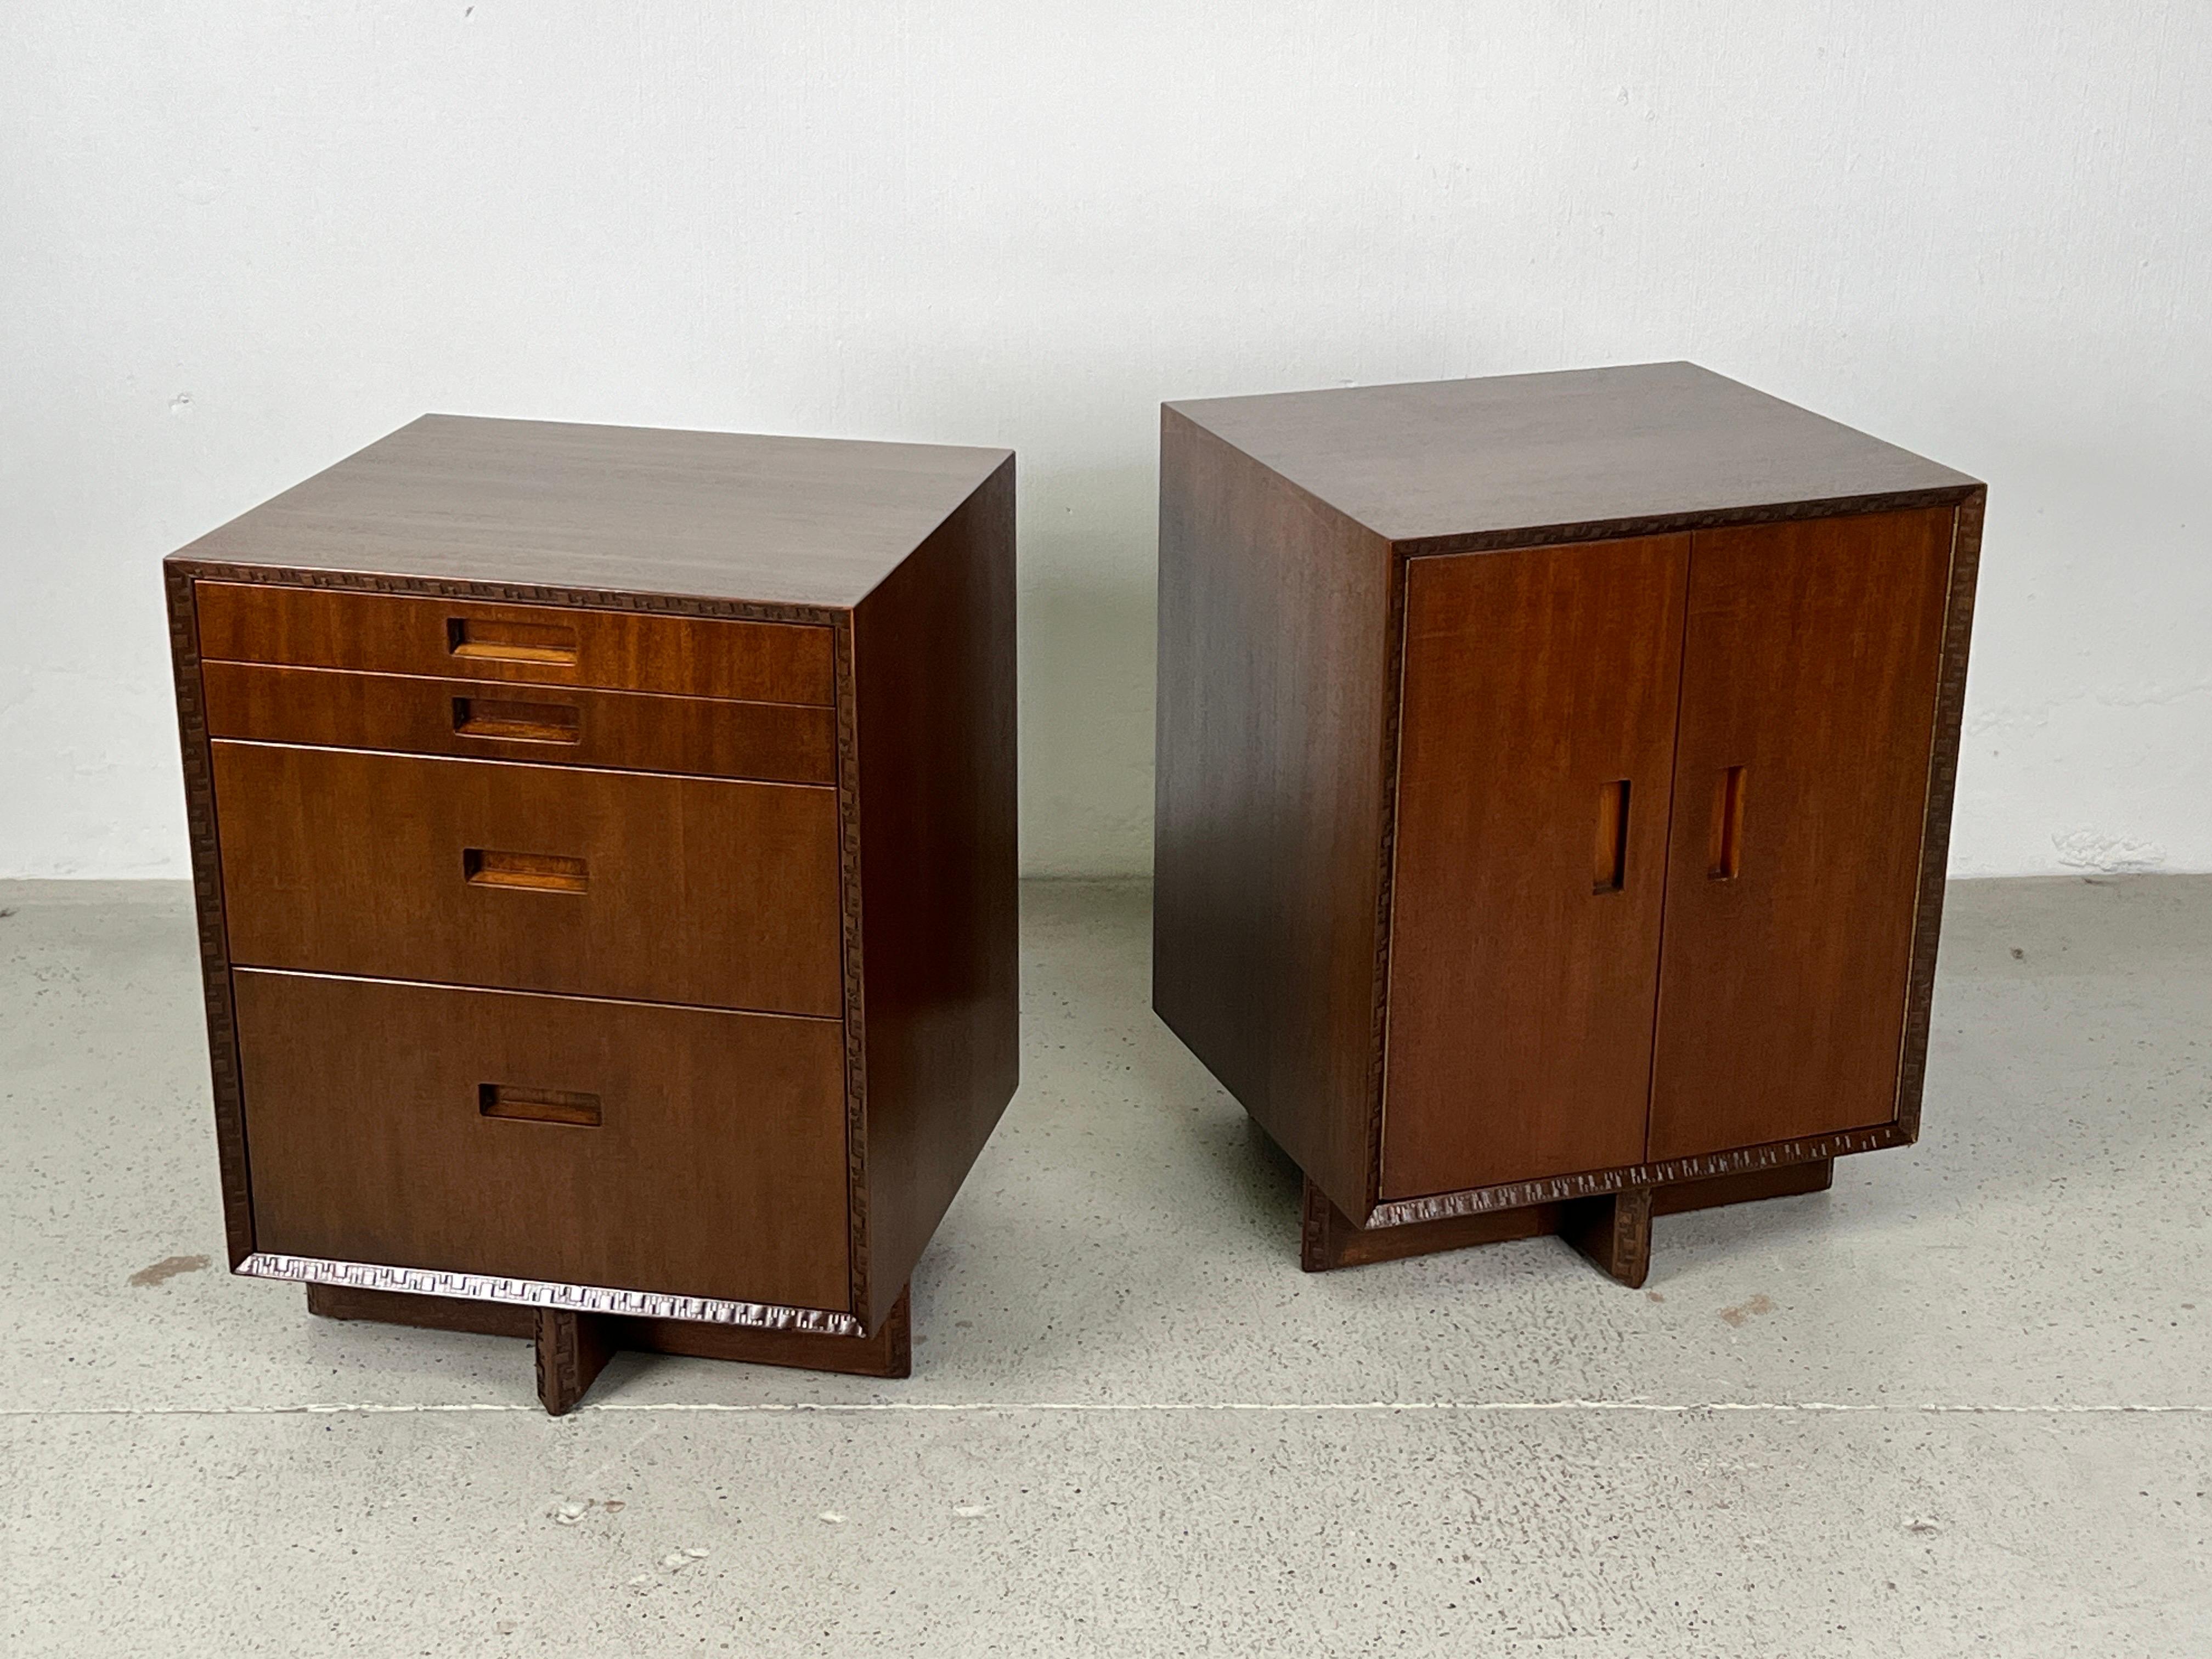 A pair of mahogany chests or nightstands designed by Frank Lloyd Wright for Henredon.